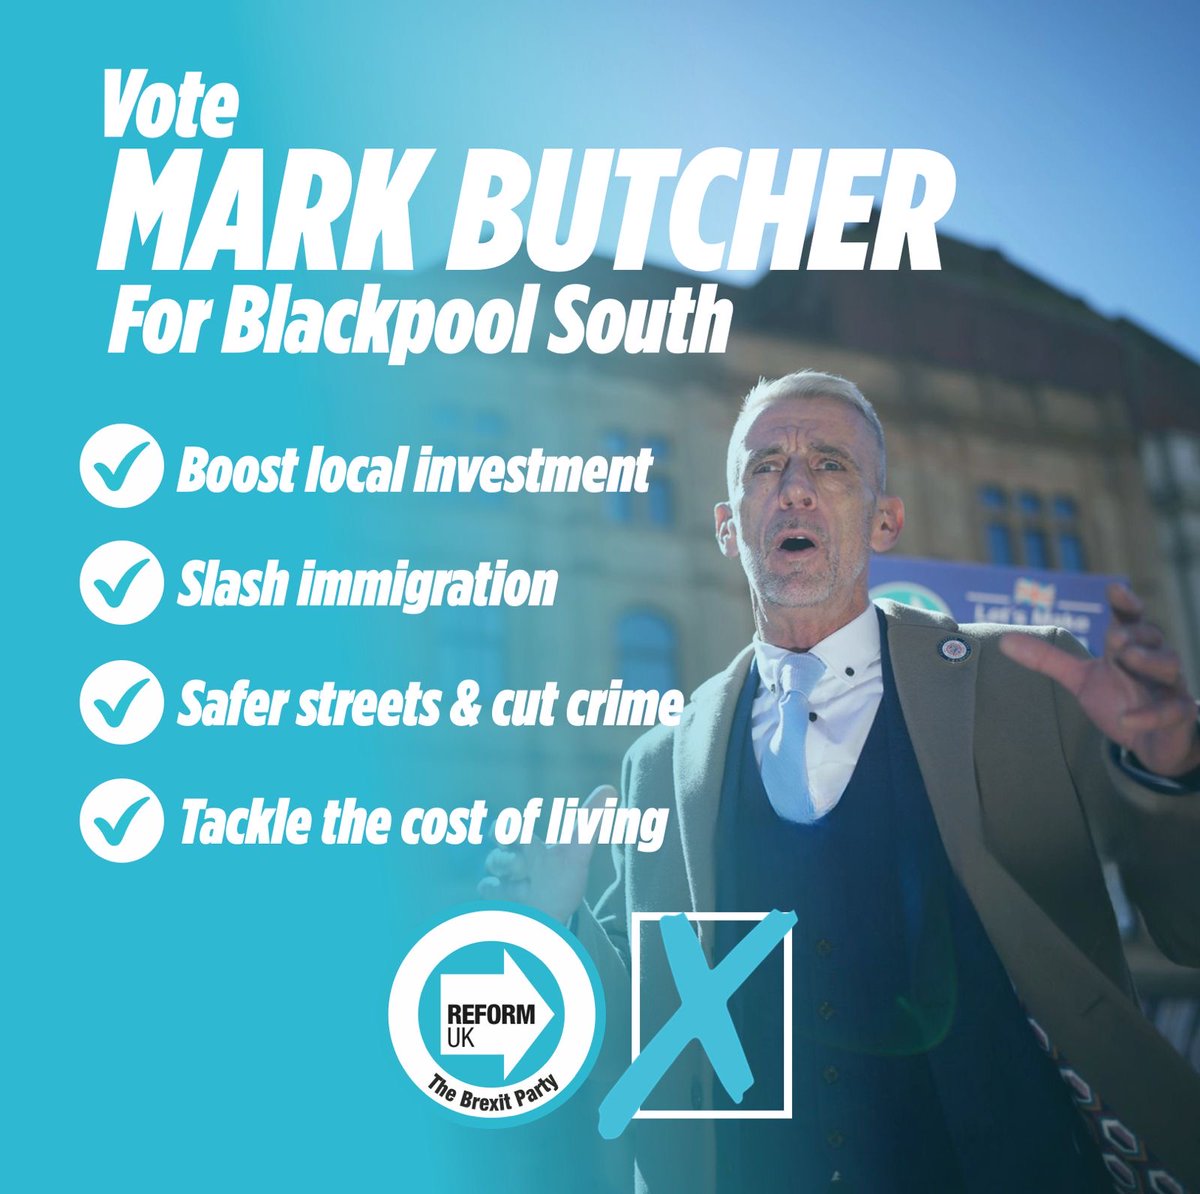 For too long, places like Blackpool have been ignored by the political establishment. On May 2nd, vote Mark Butcher to bring investment back to Blackpool. Let’s do it for Blackpool!